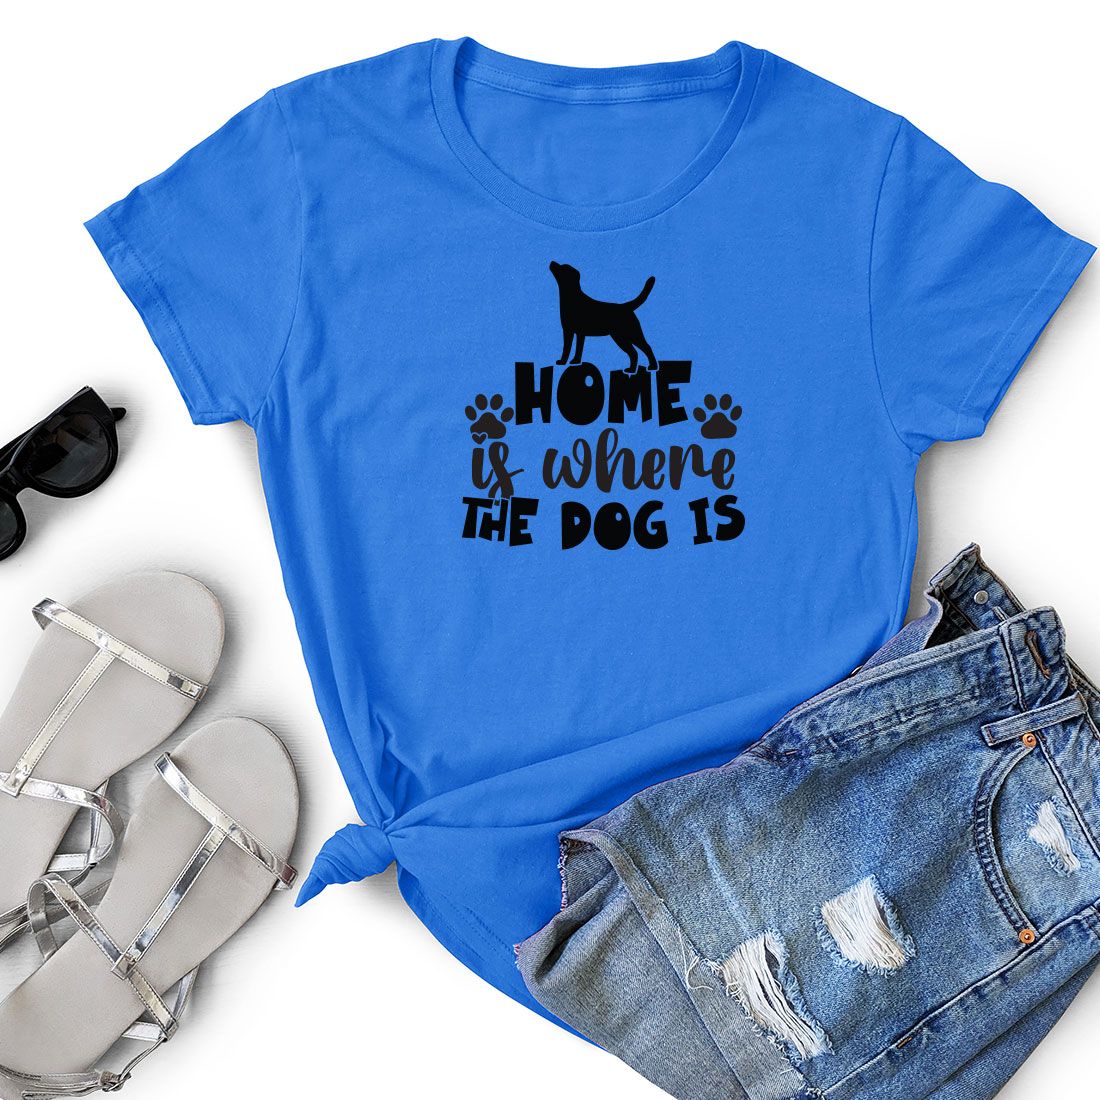 T - shirt that says home is where the dog is.